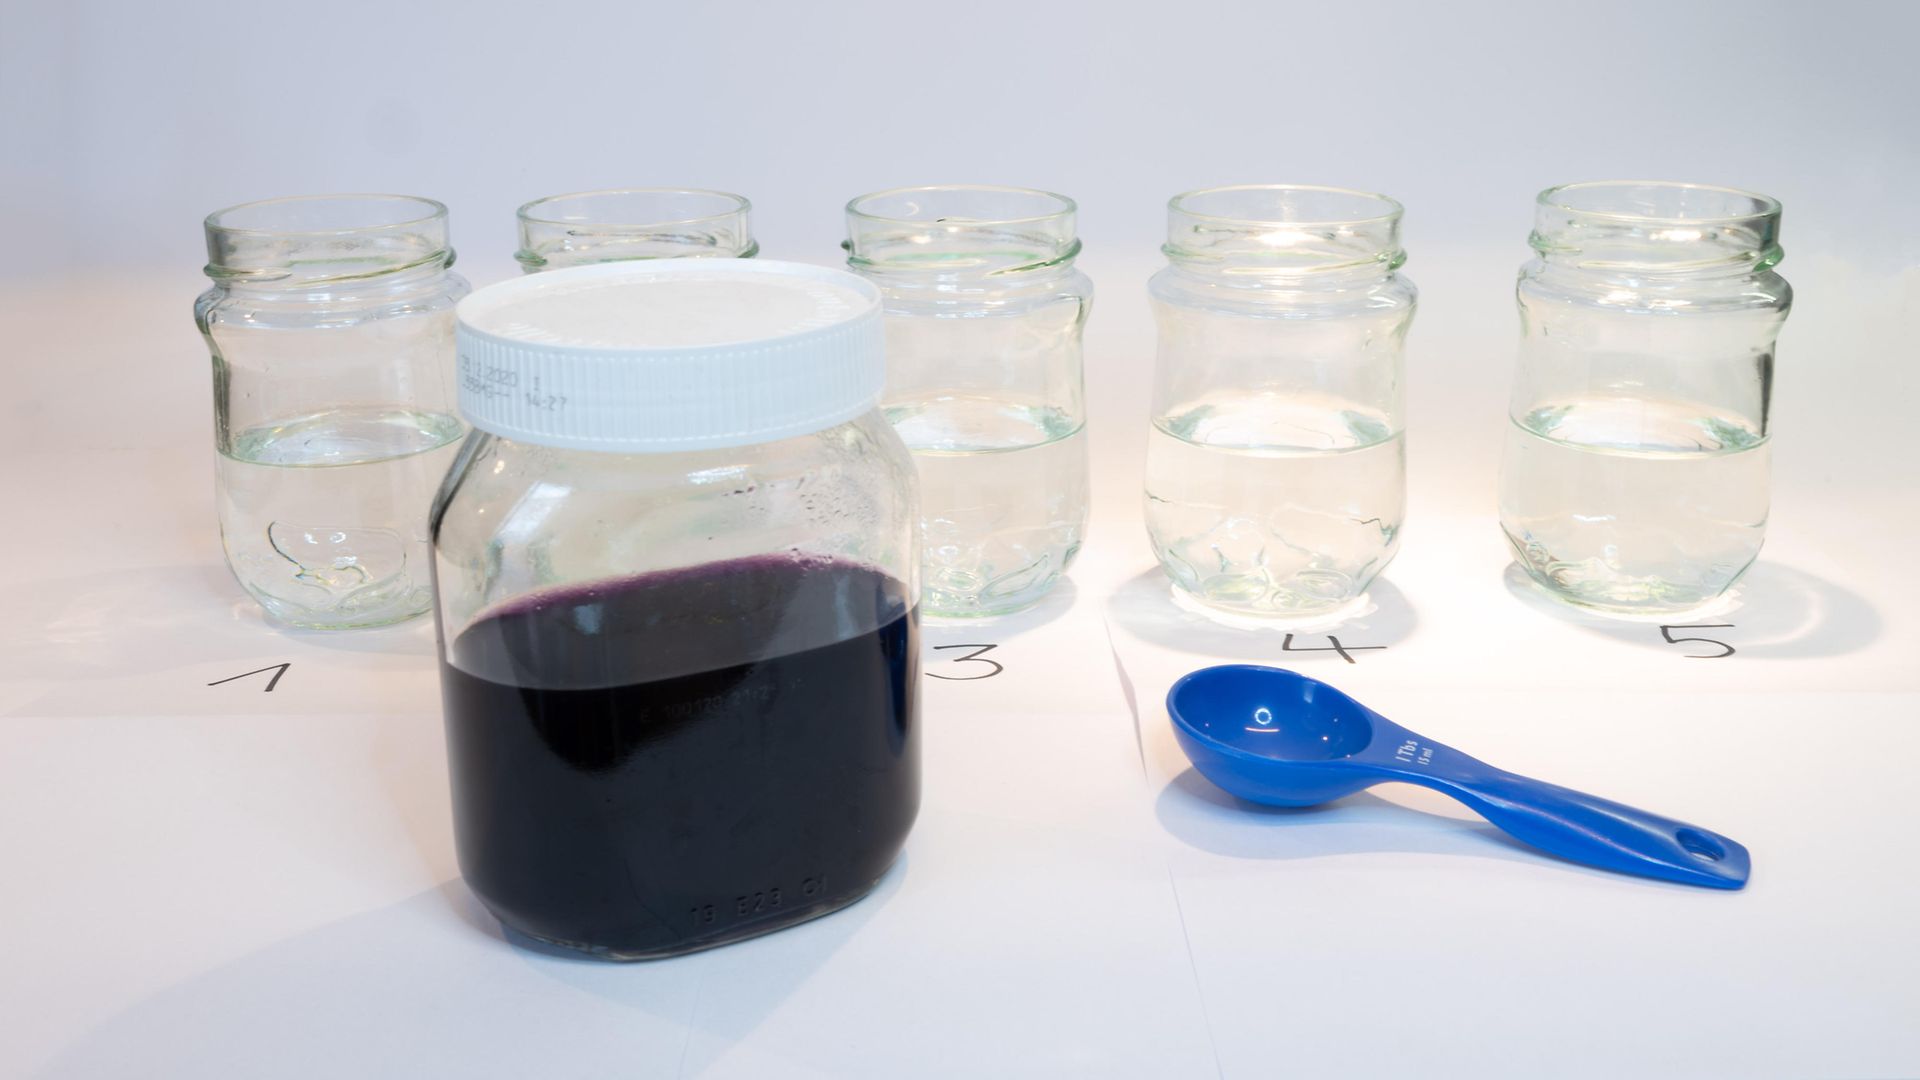 large glass jar with dark liquid in front of five empty glas jars